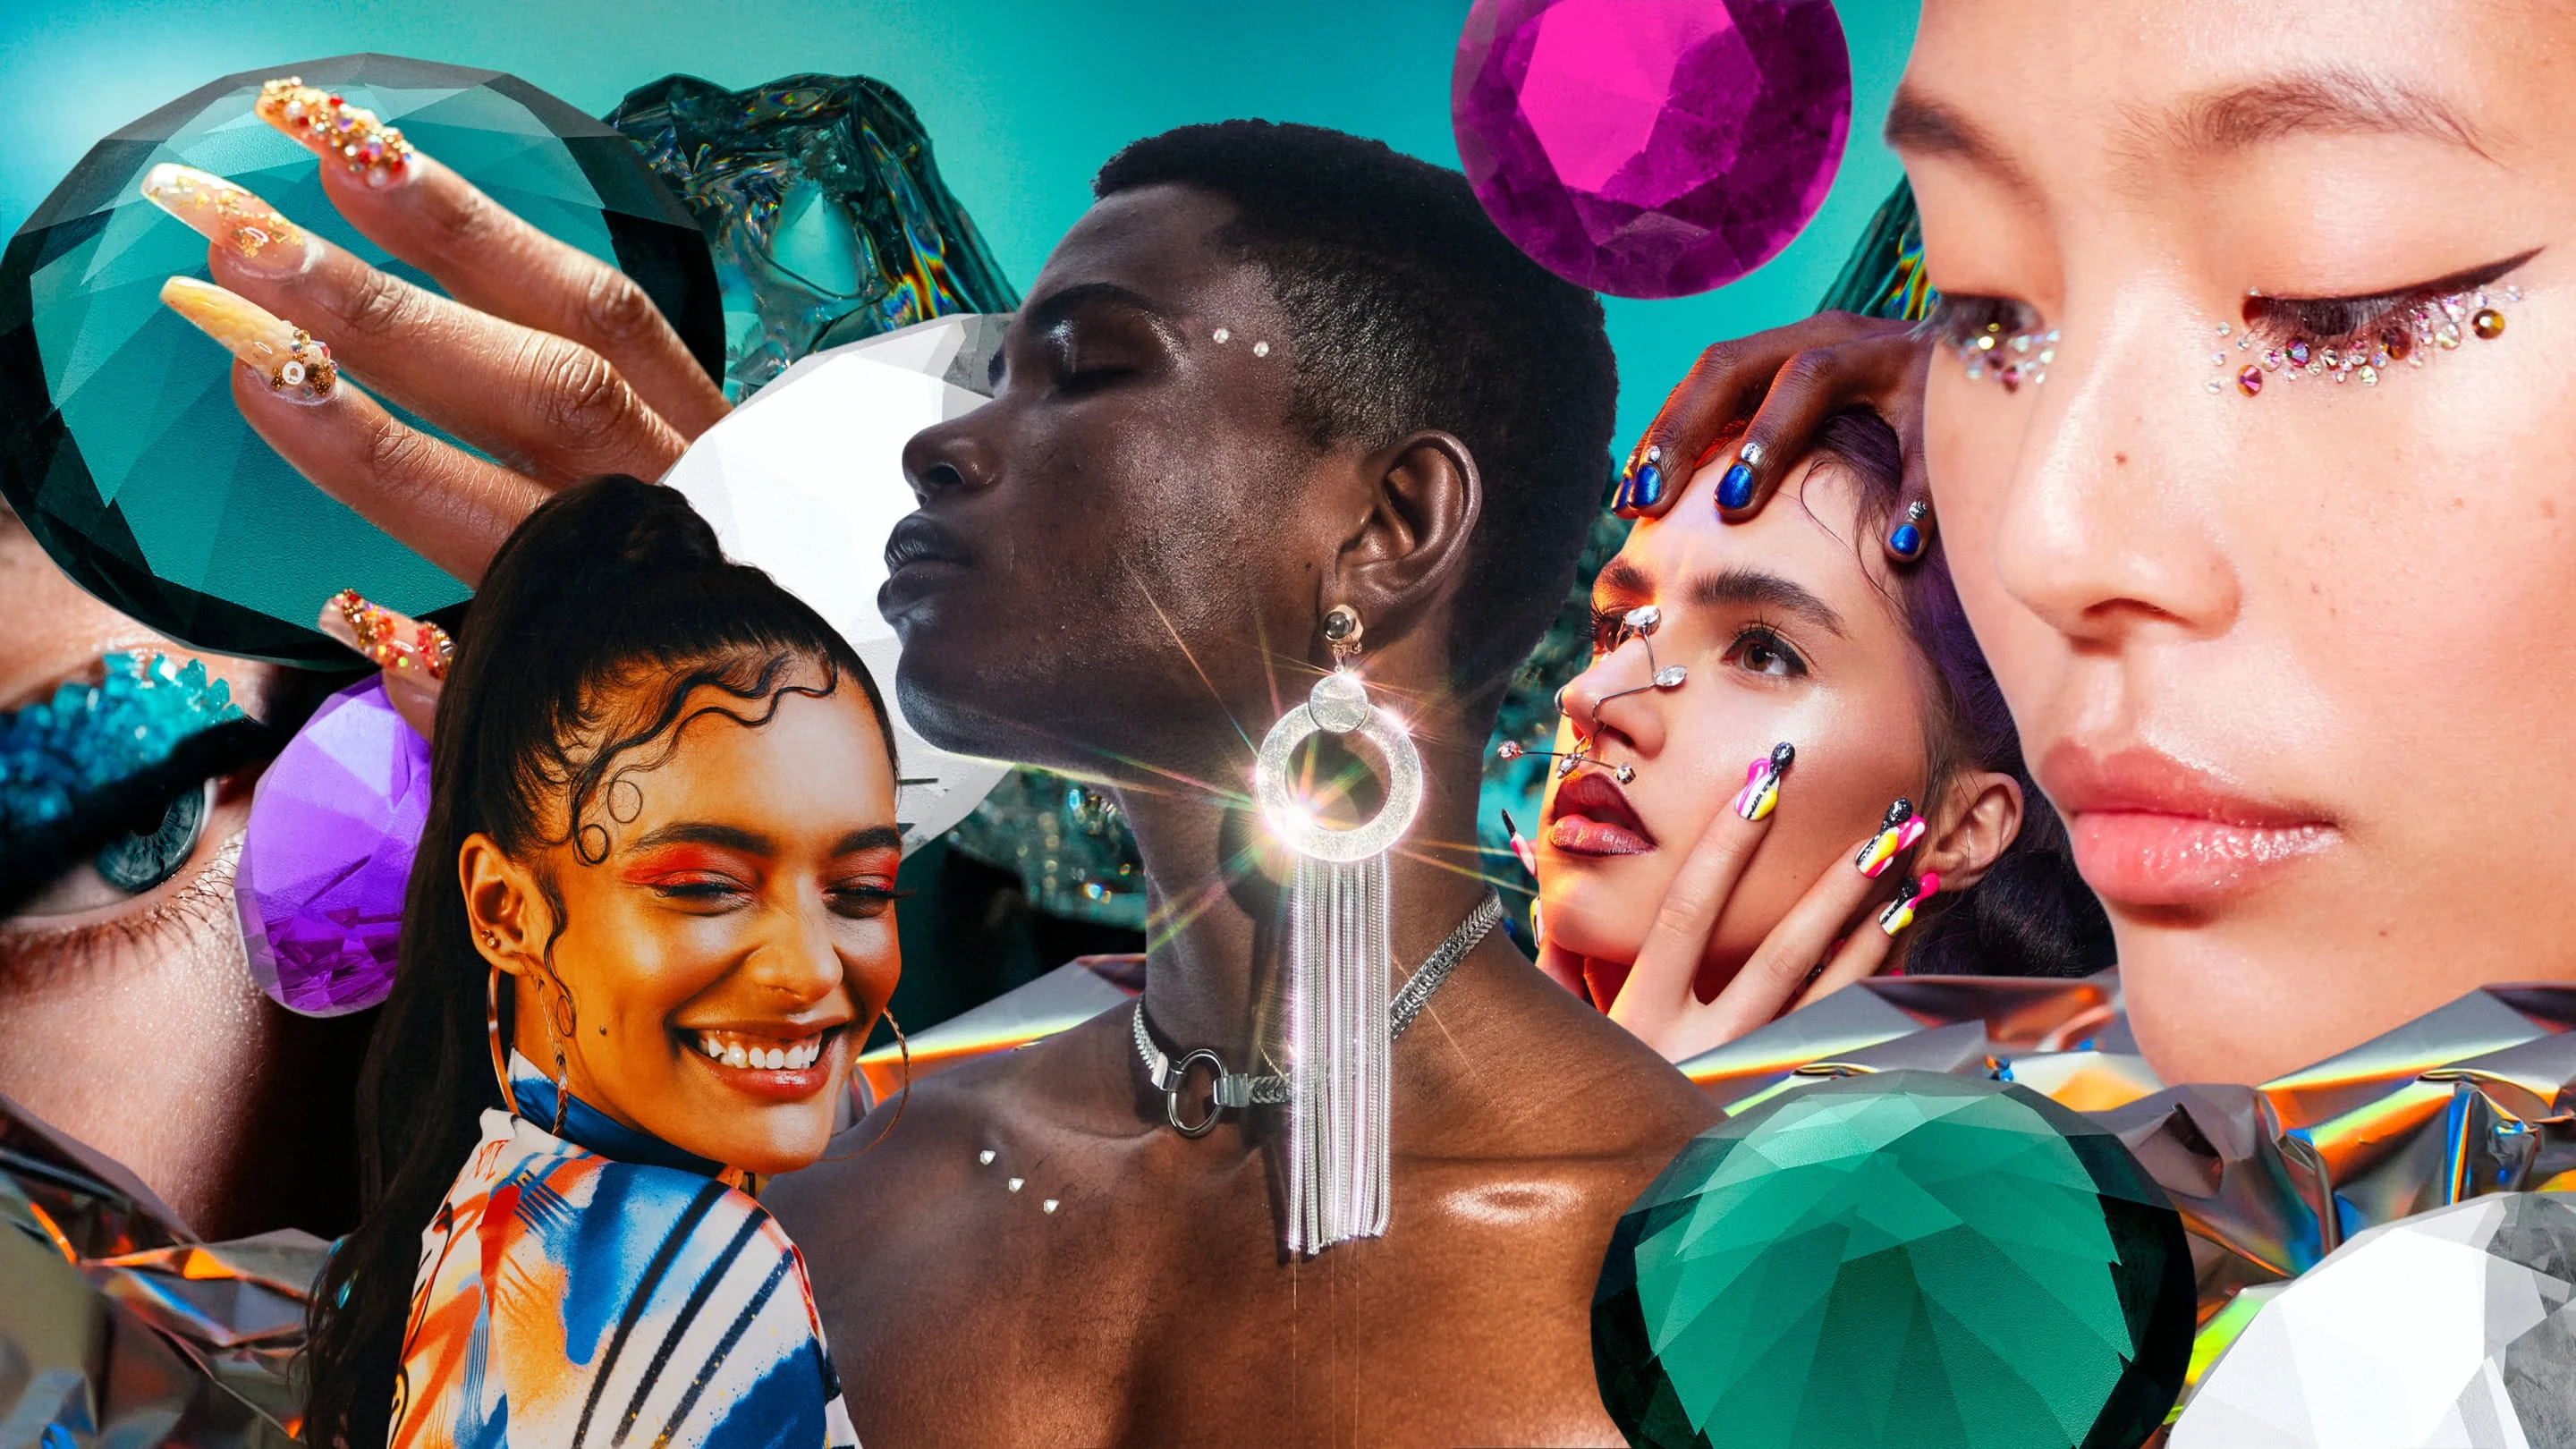 Collage with different gemstones and people wearing gems. Black woman smiling at left with a high ponytail and combed edges. Black person at center wearing a big shiny earring. East Asian woman at right with rhinestones under her eyes. Woman with sparkly blue eye makeup at left. Gemstones and a hand with jeweled fingernails.
